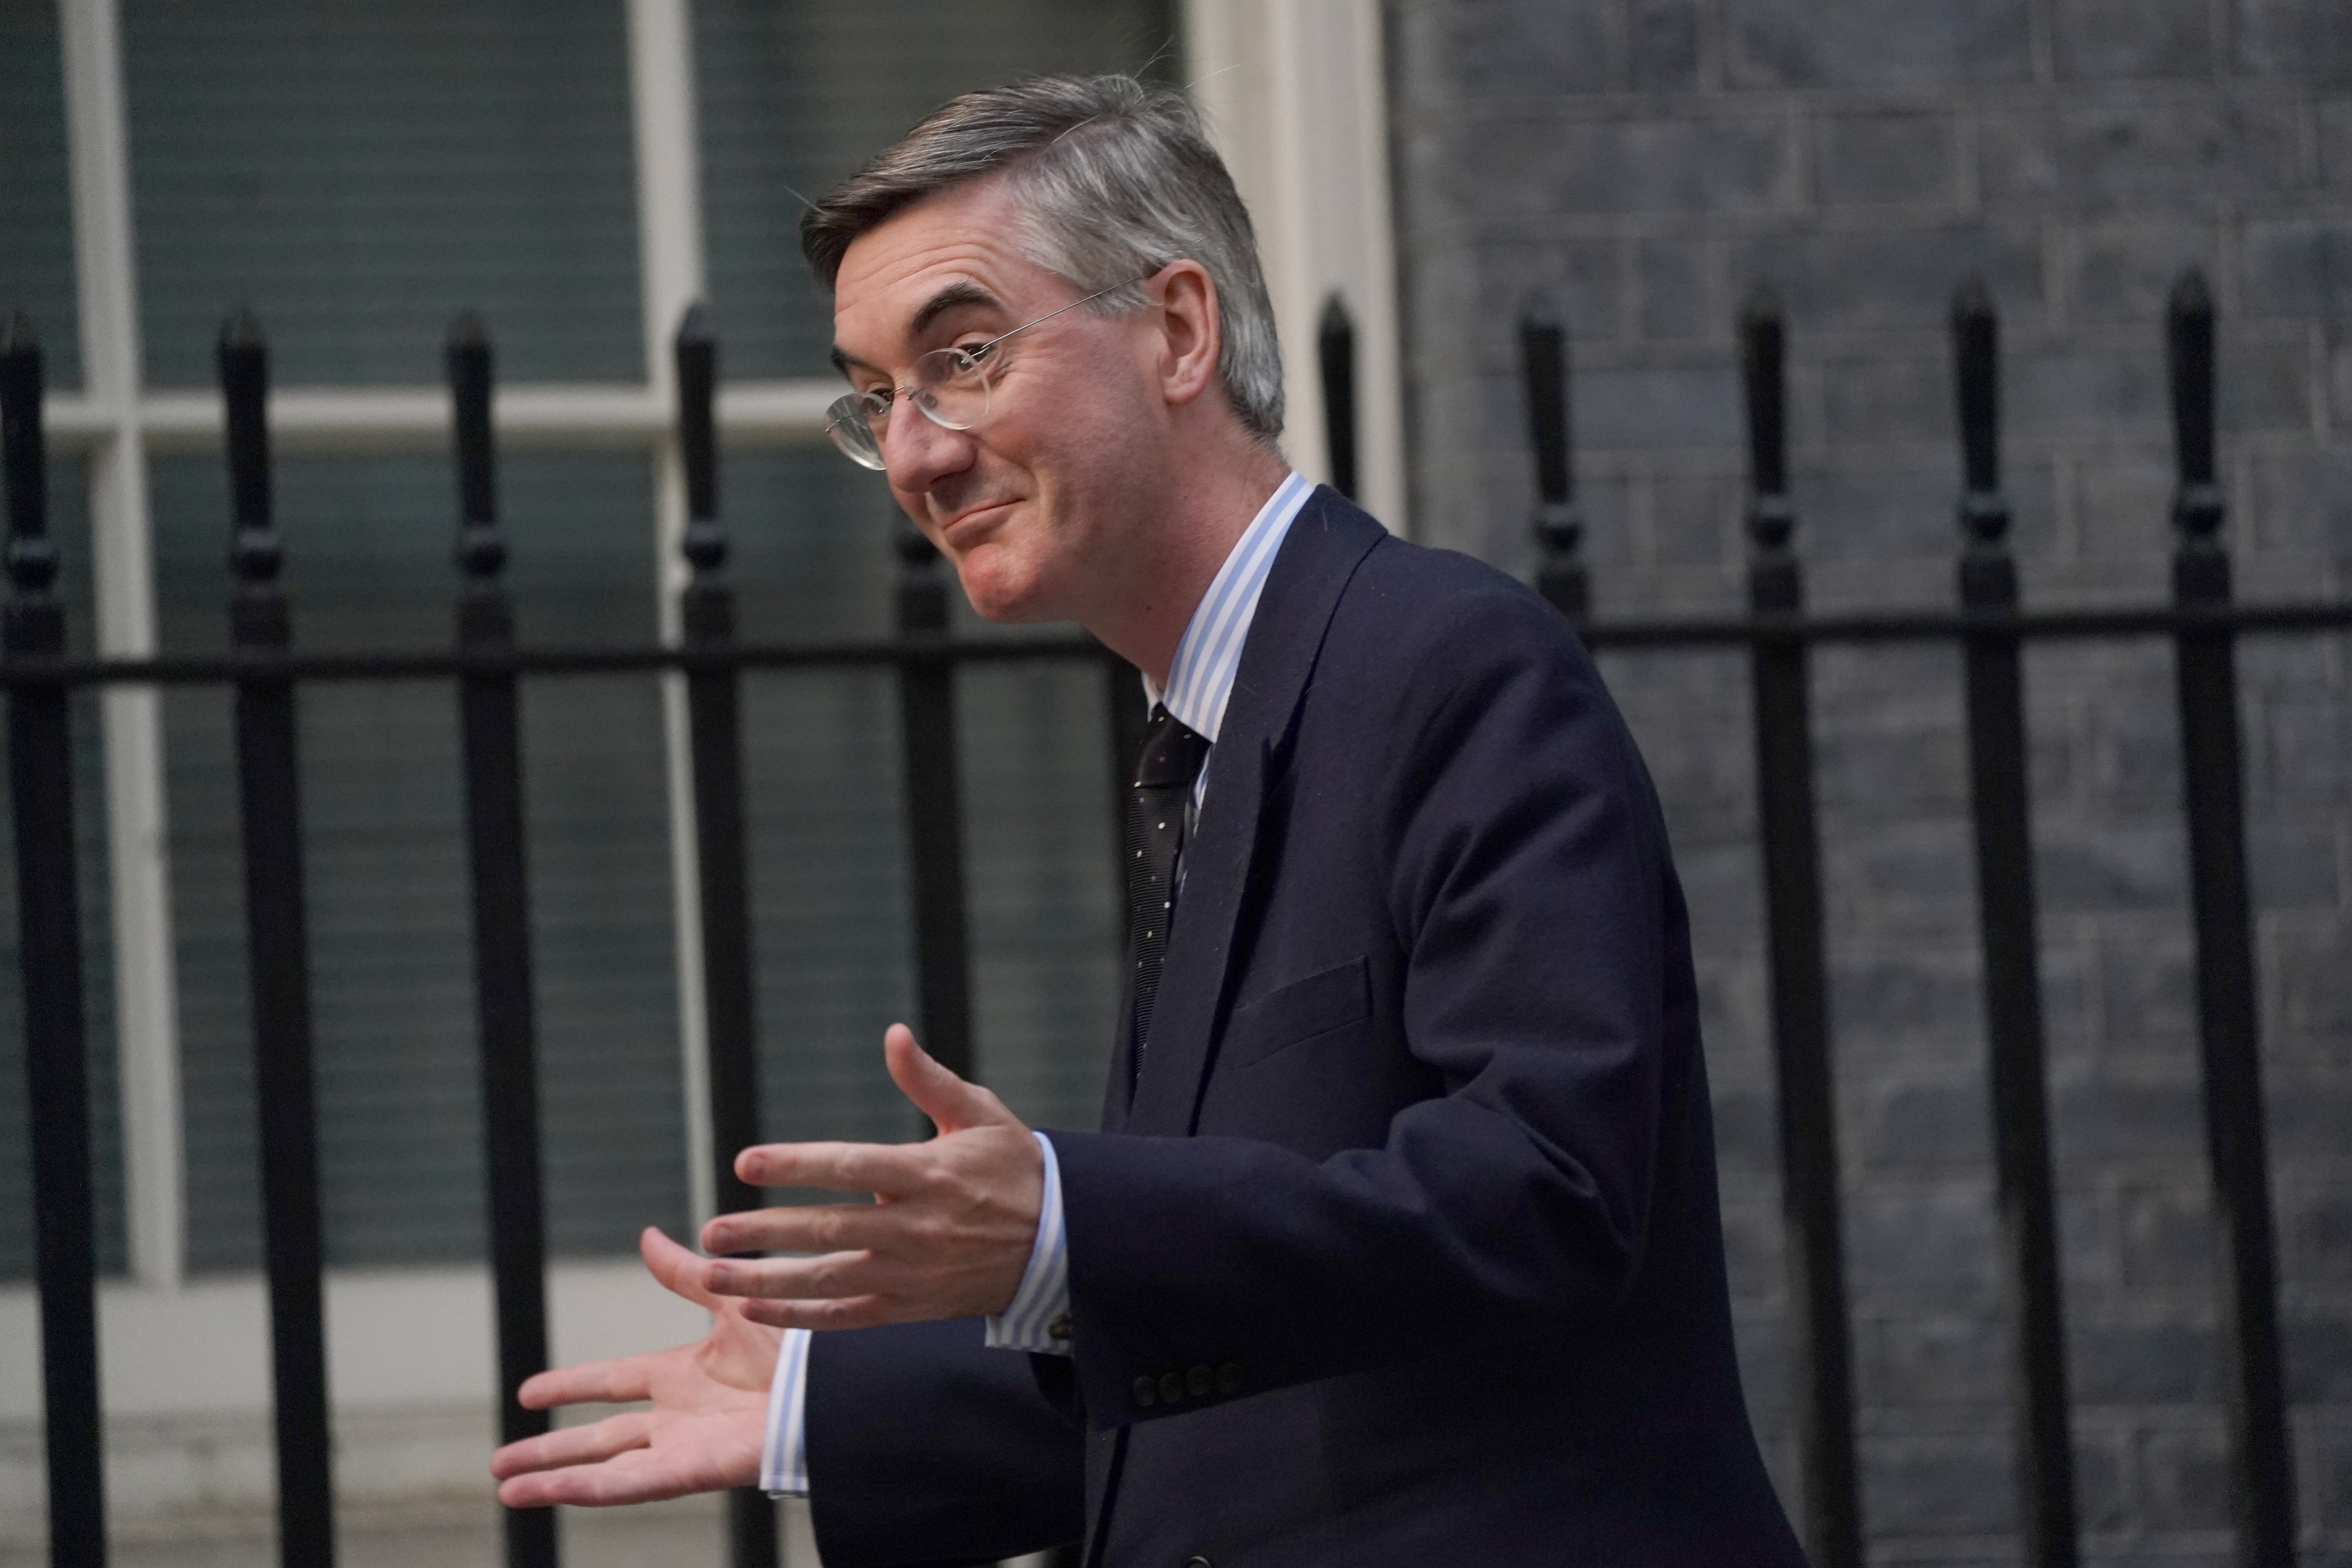 Jacob Rees-Mogg made an eloquent case for the proposed reforms prior to the government’s change of plan